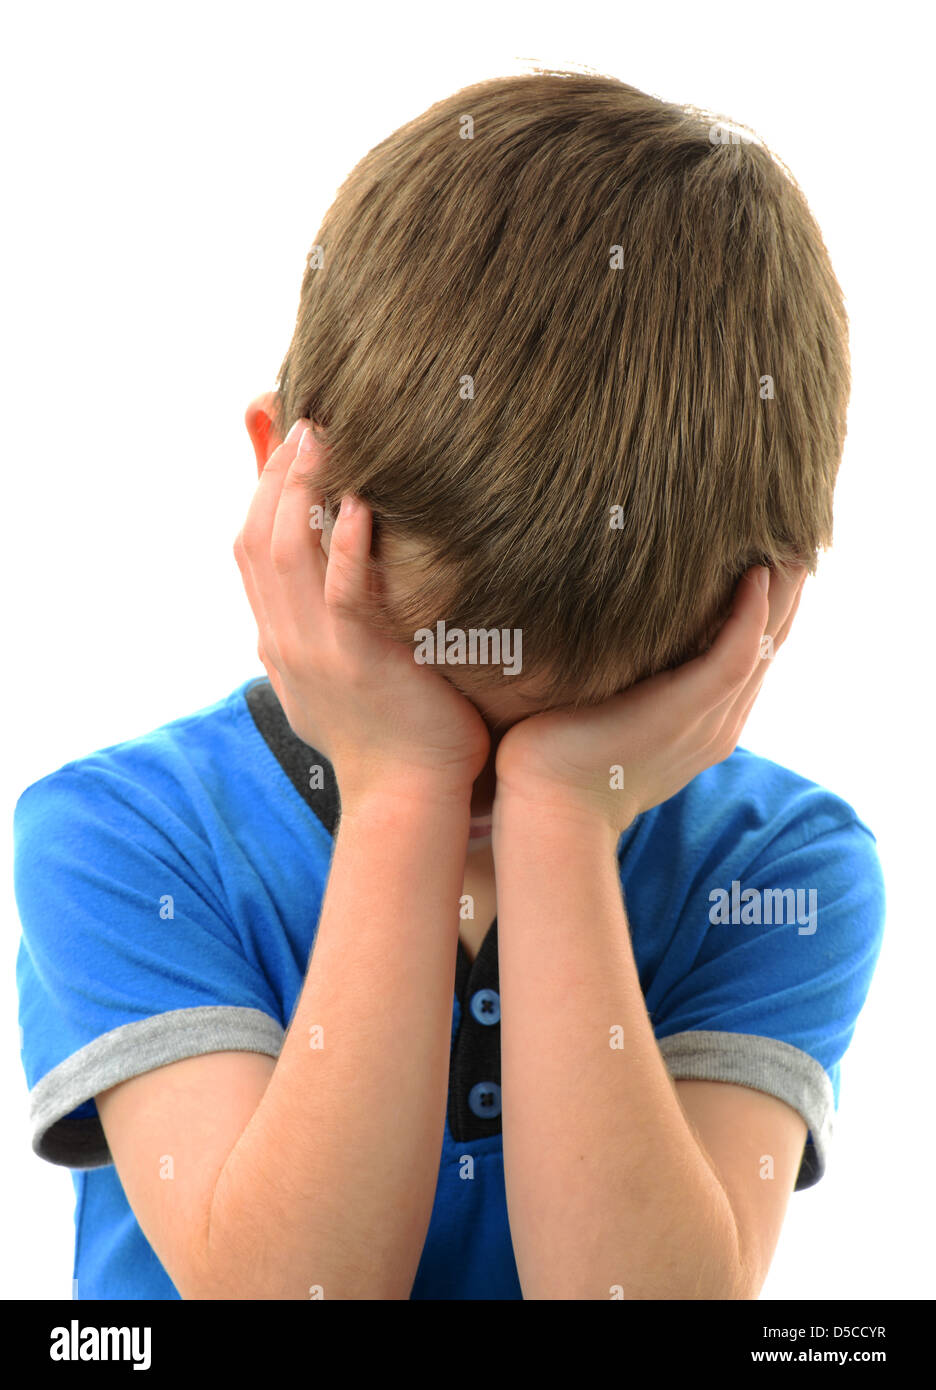 Boy holding his head in his hands Stock Photo